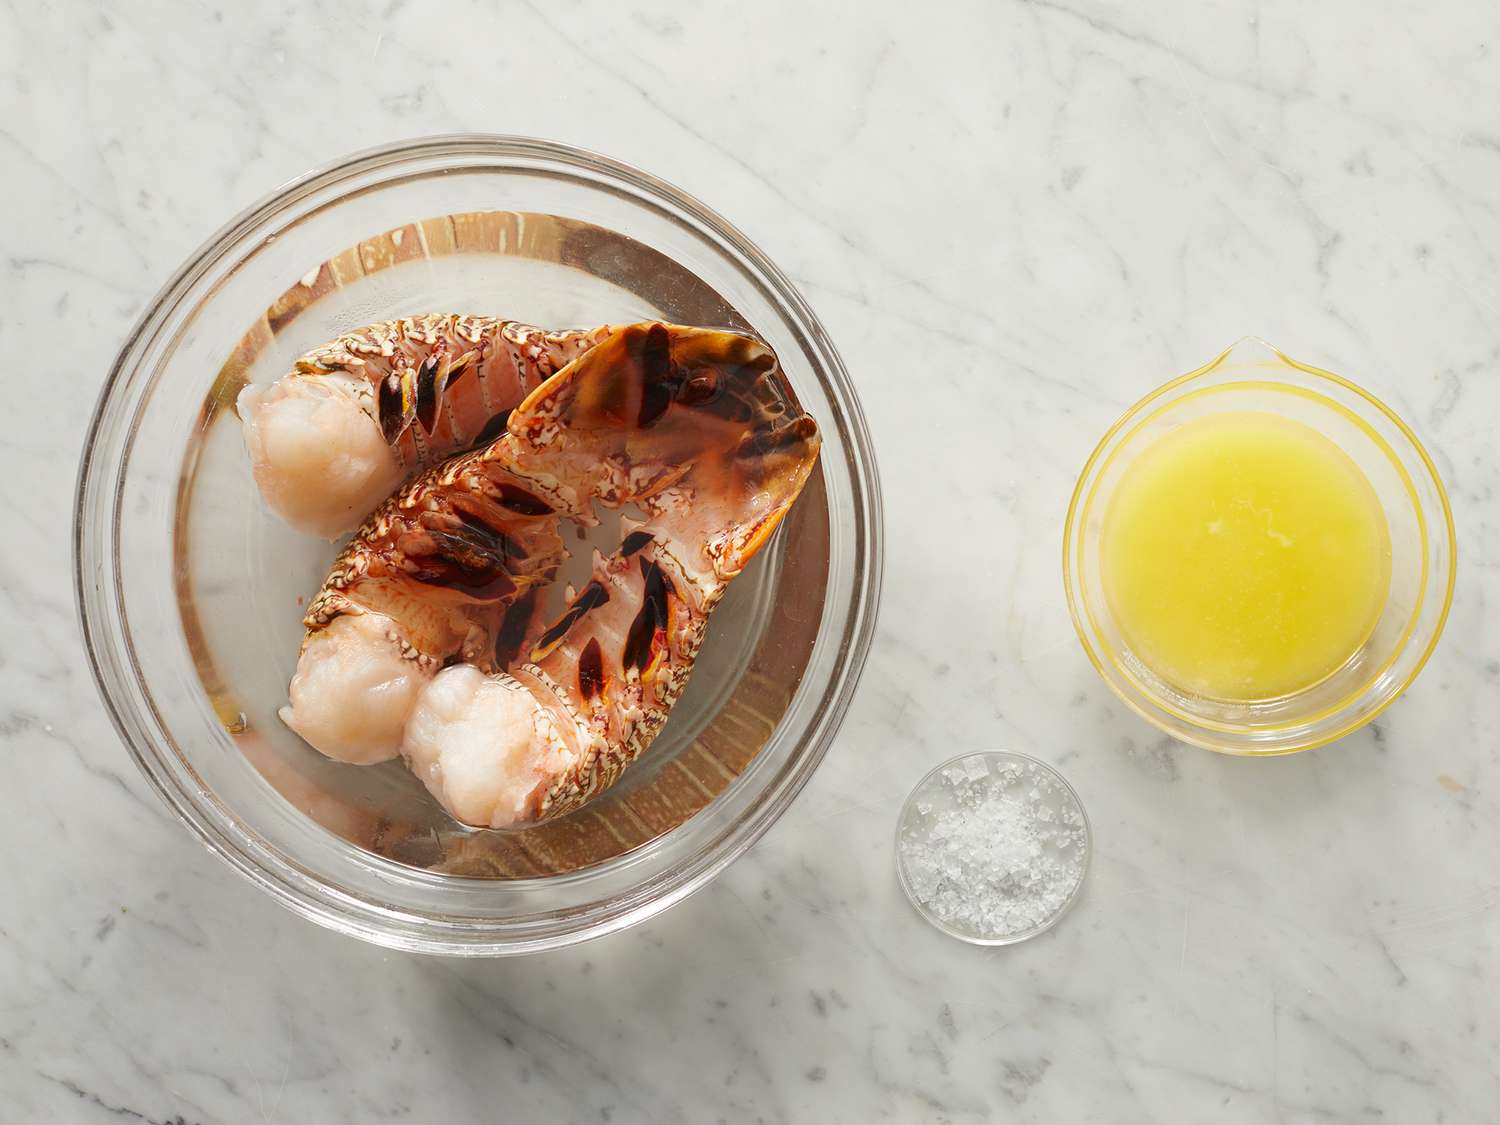 Three lobster tails, salt, and melted butter in glass bowls